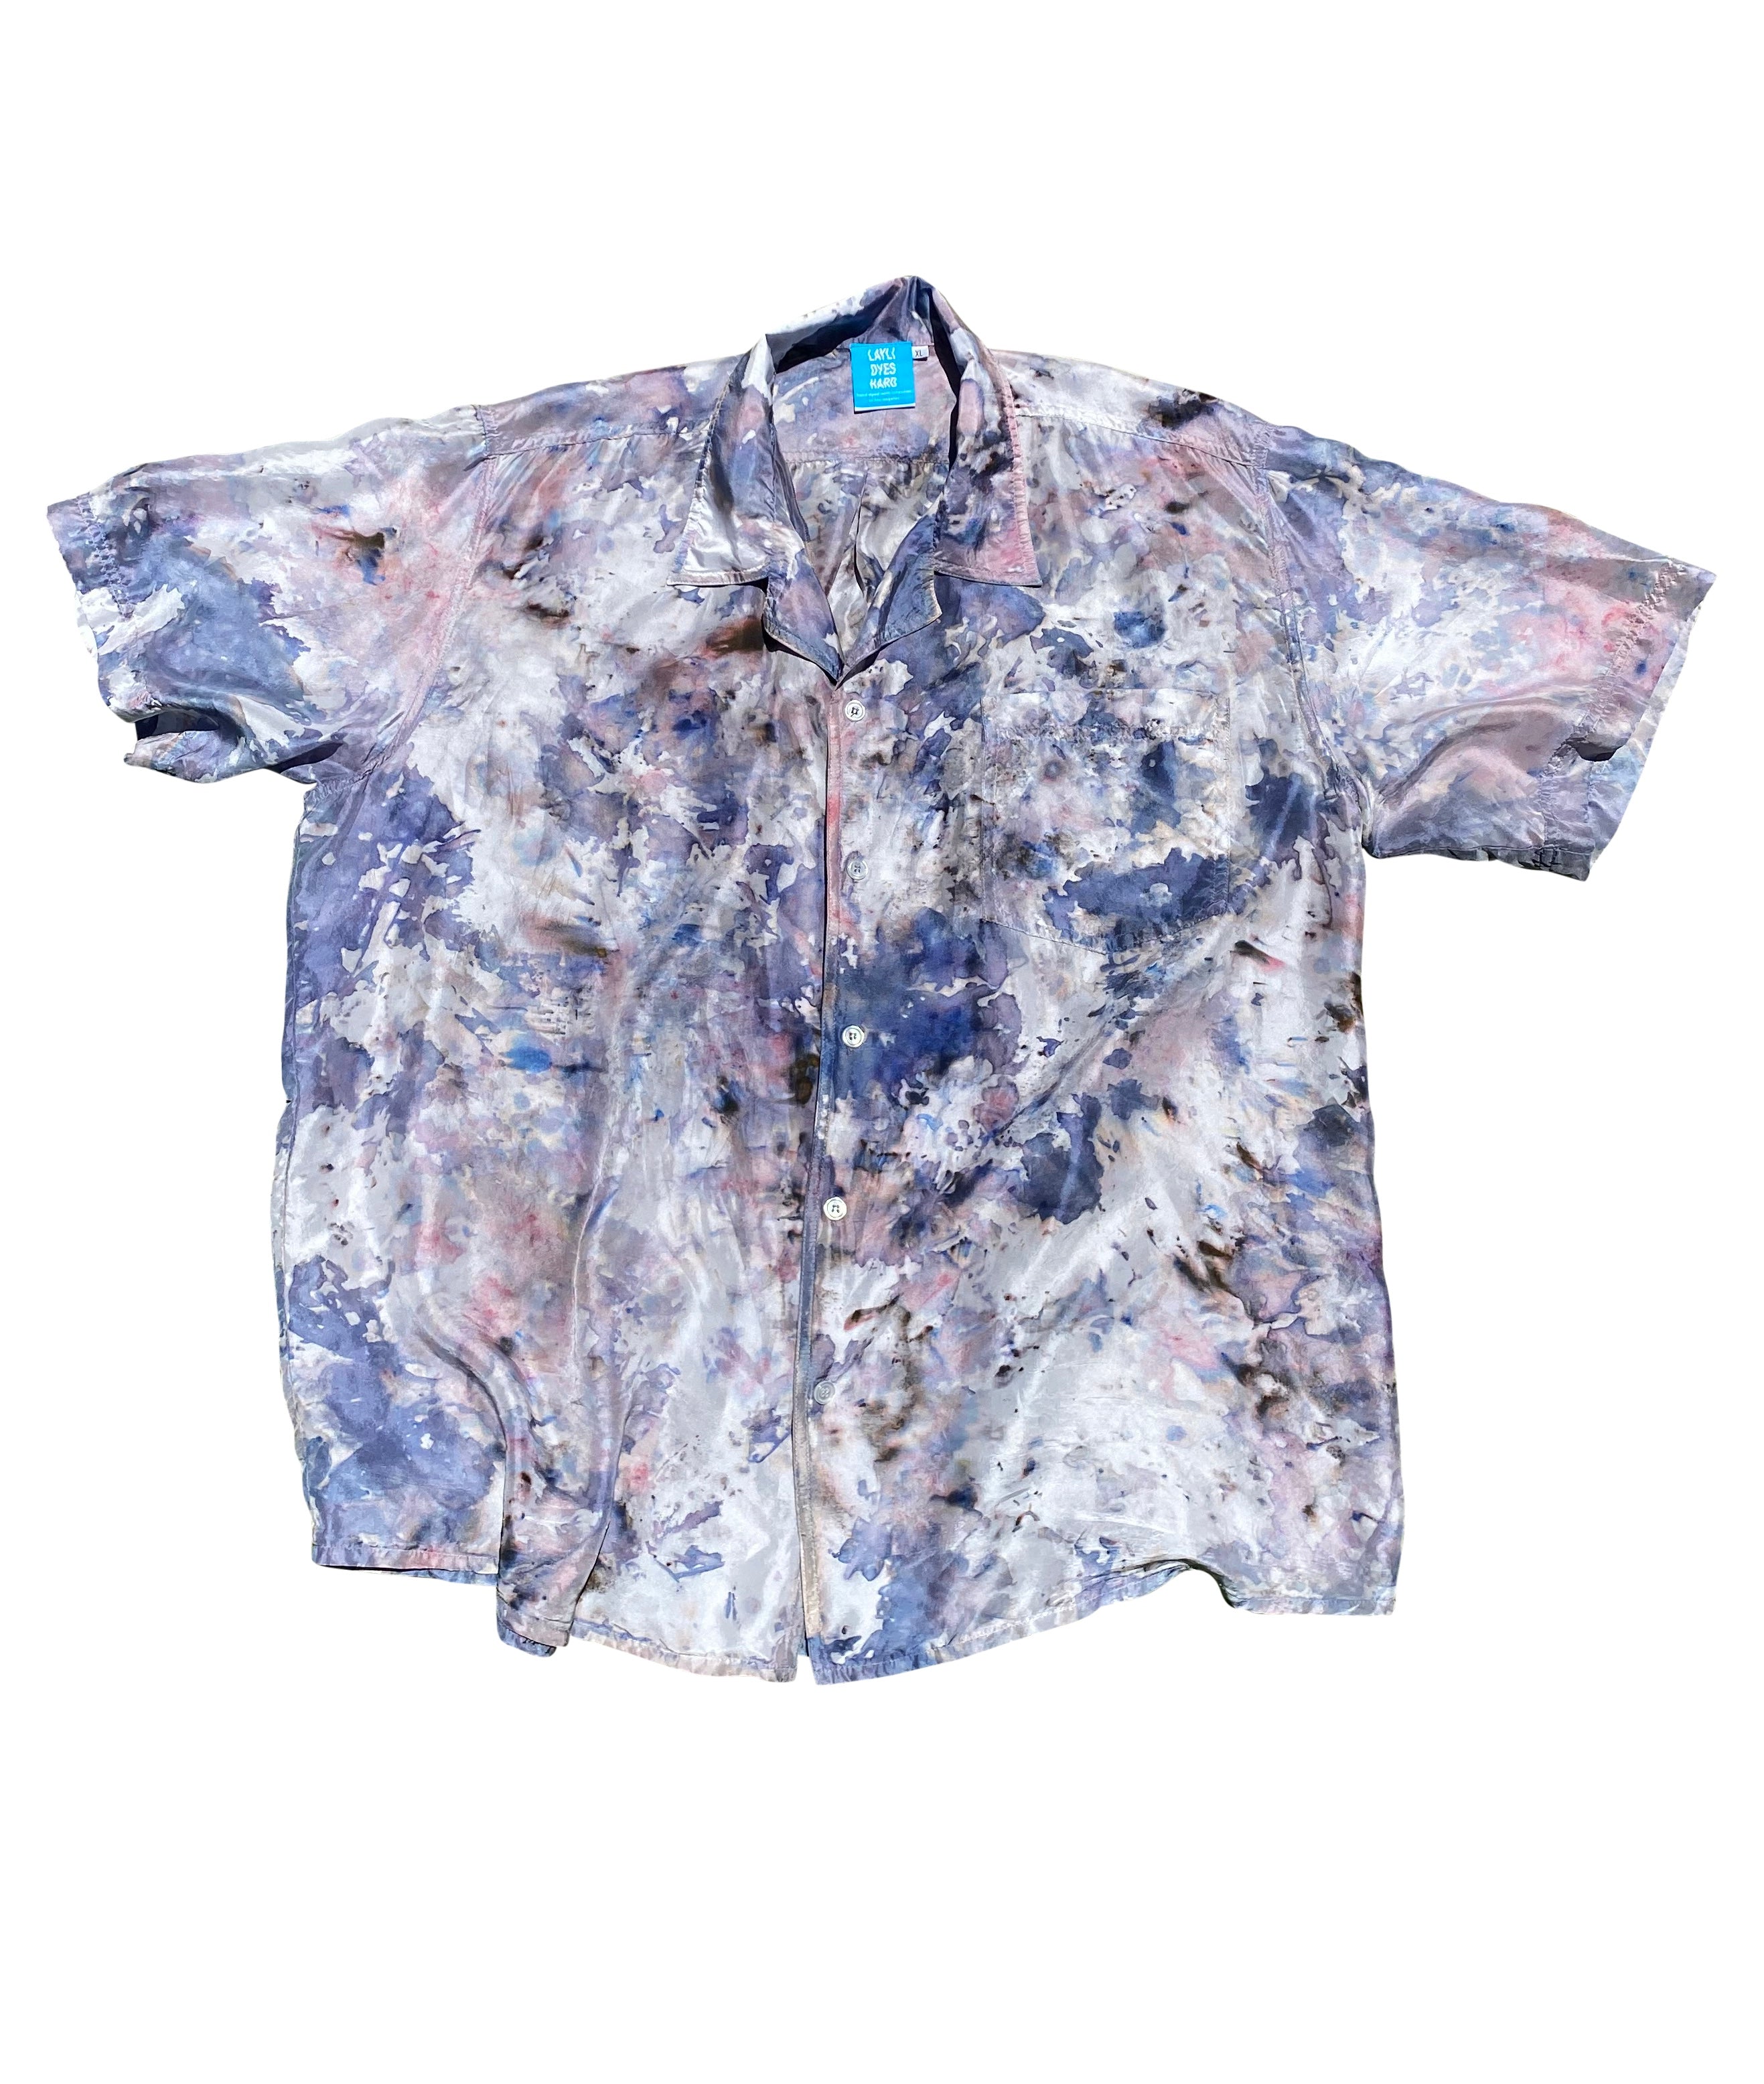 the luxe leisure shirt